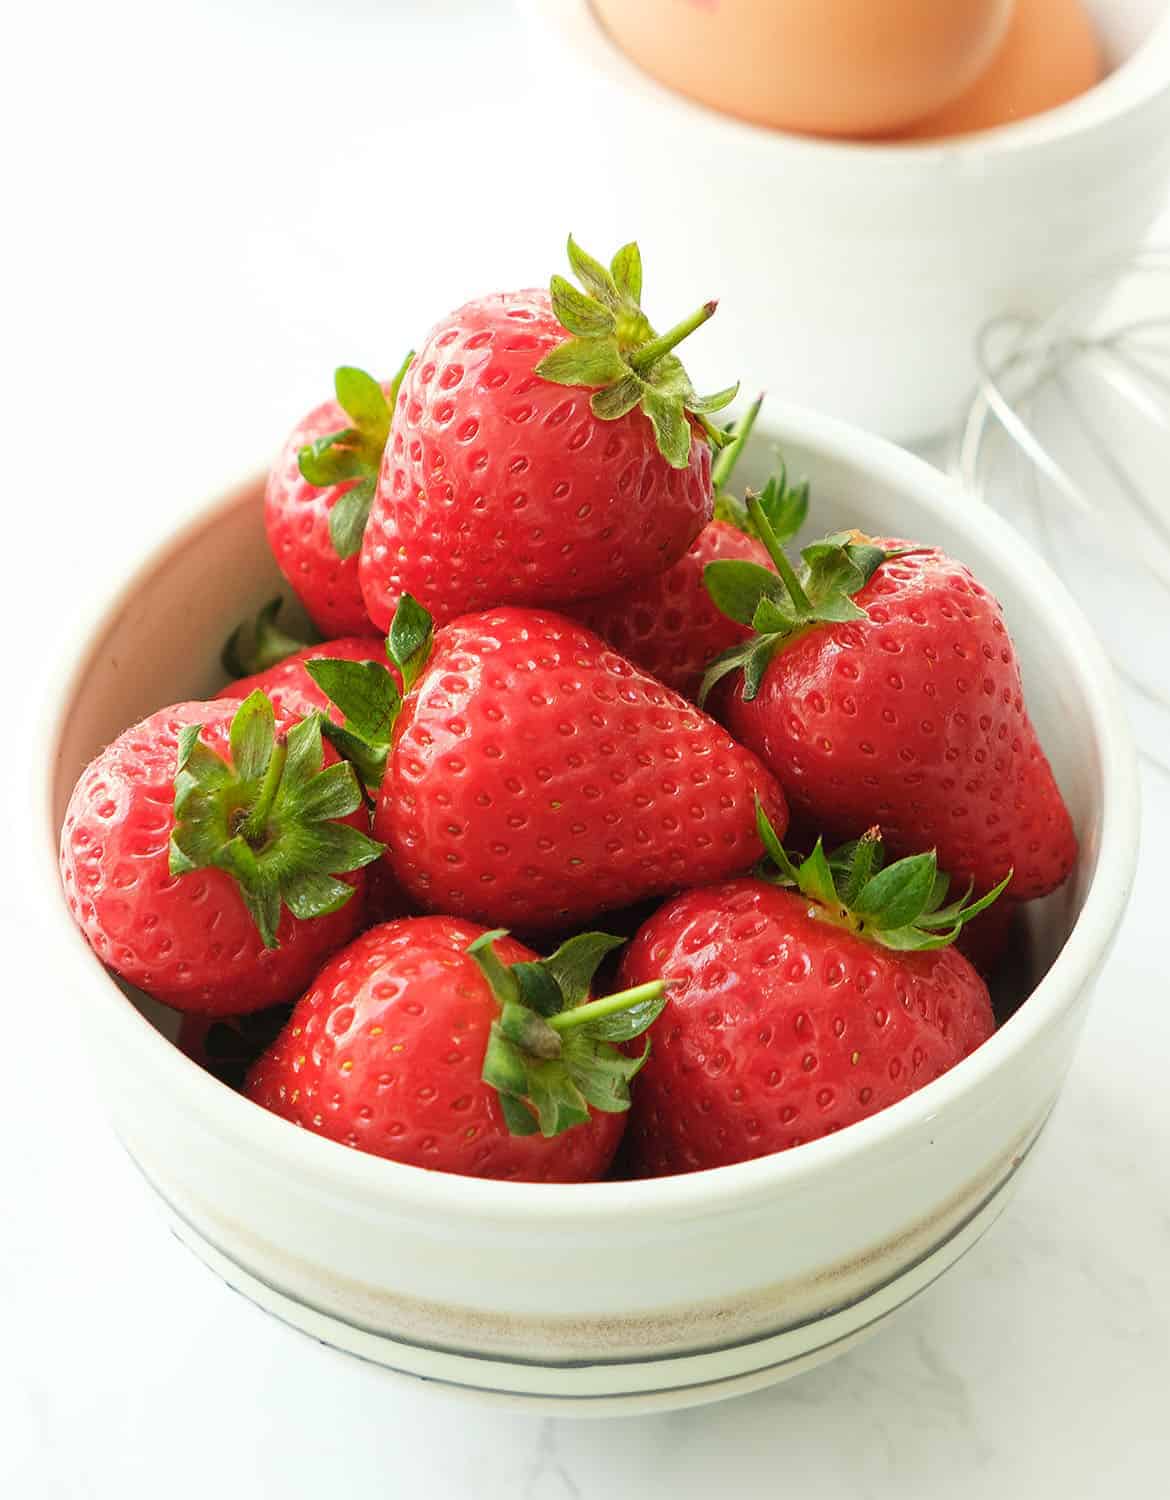 Strawberries in a bowl, in the background a small white bowl containing eggs.